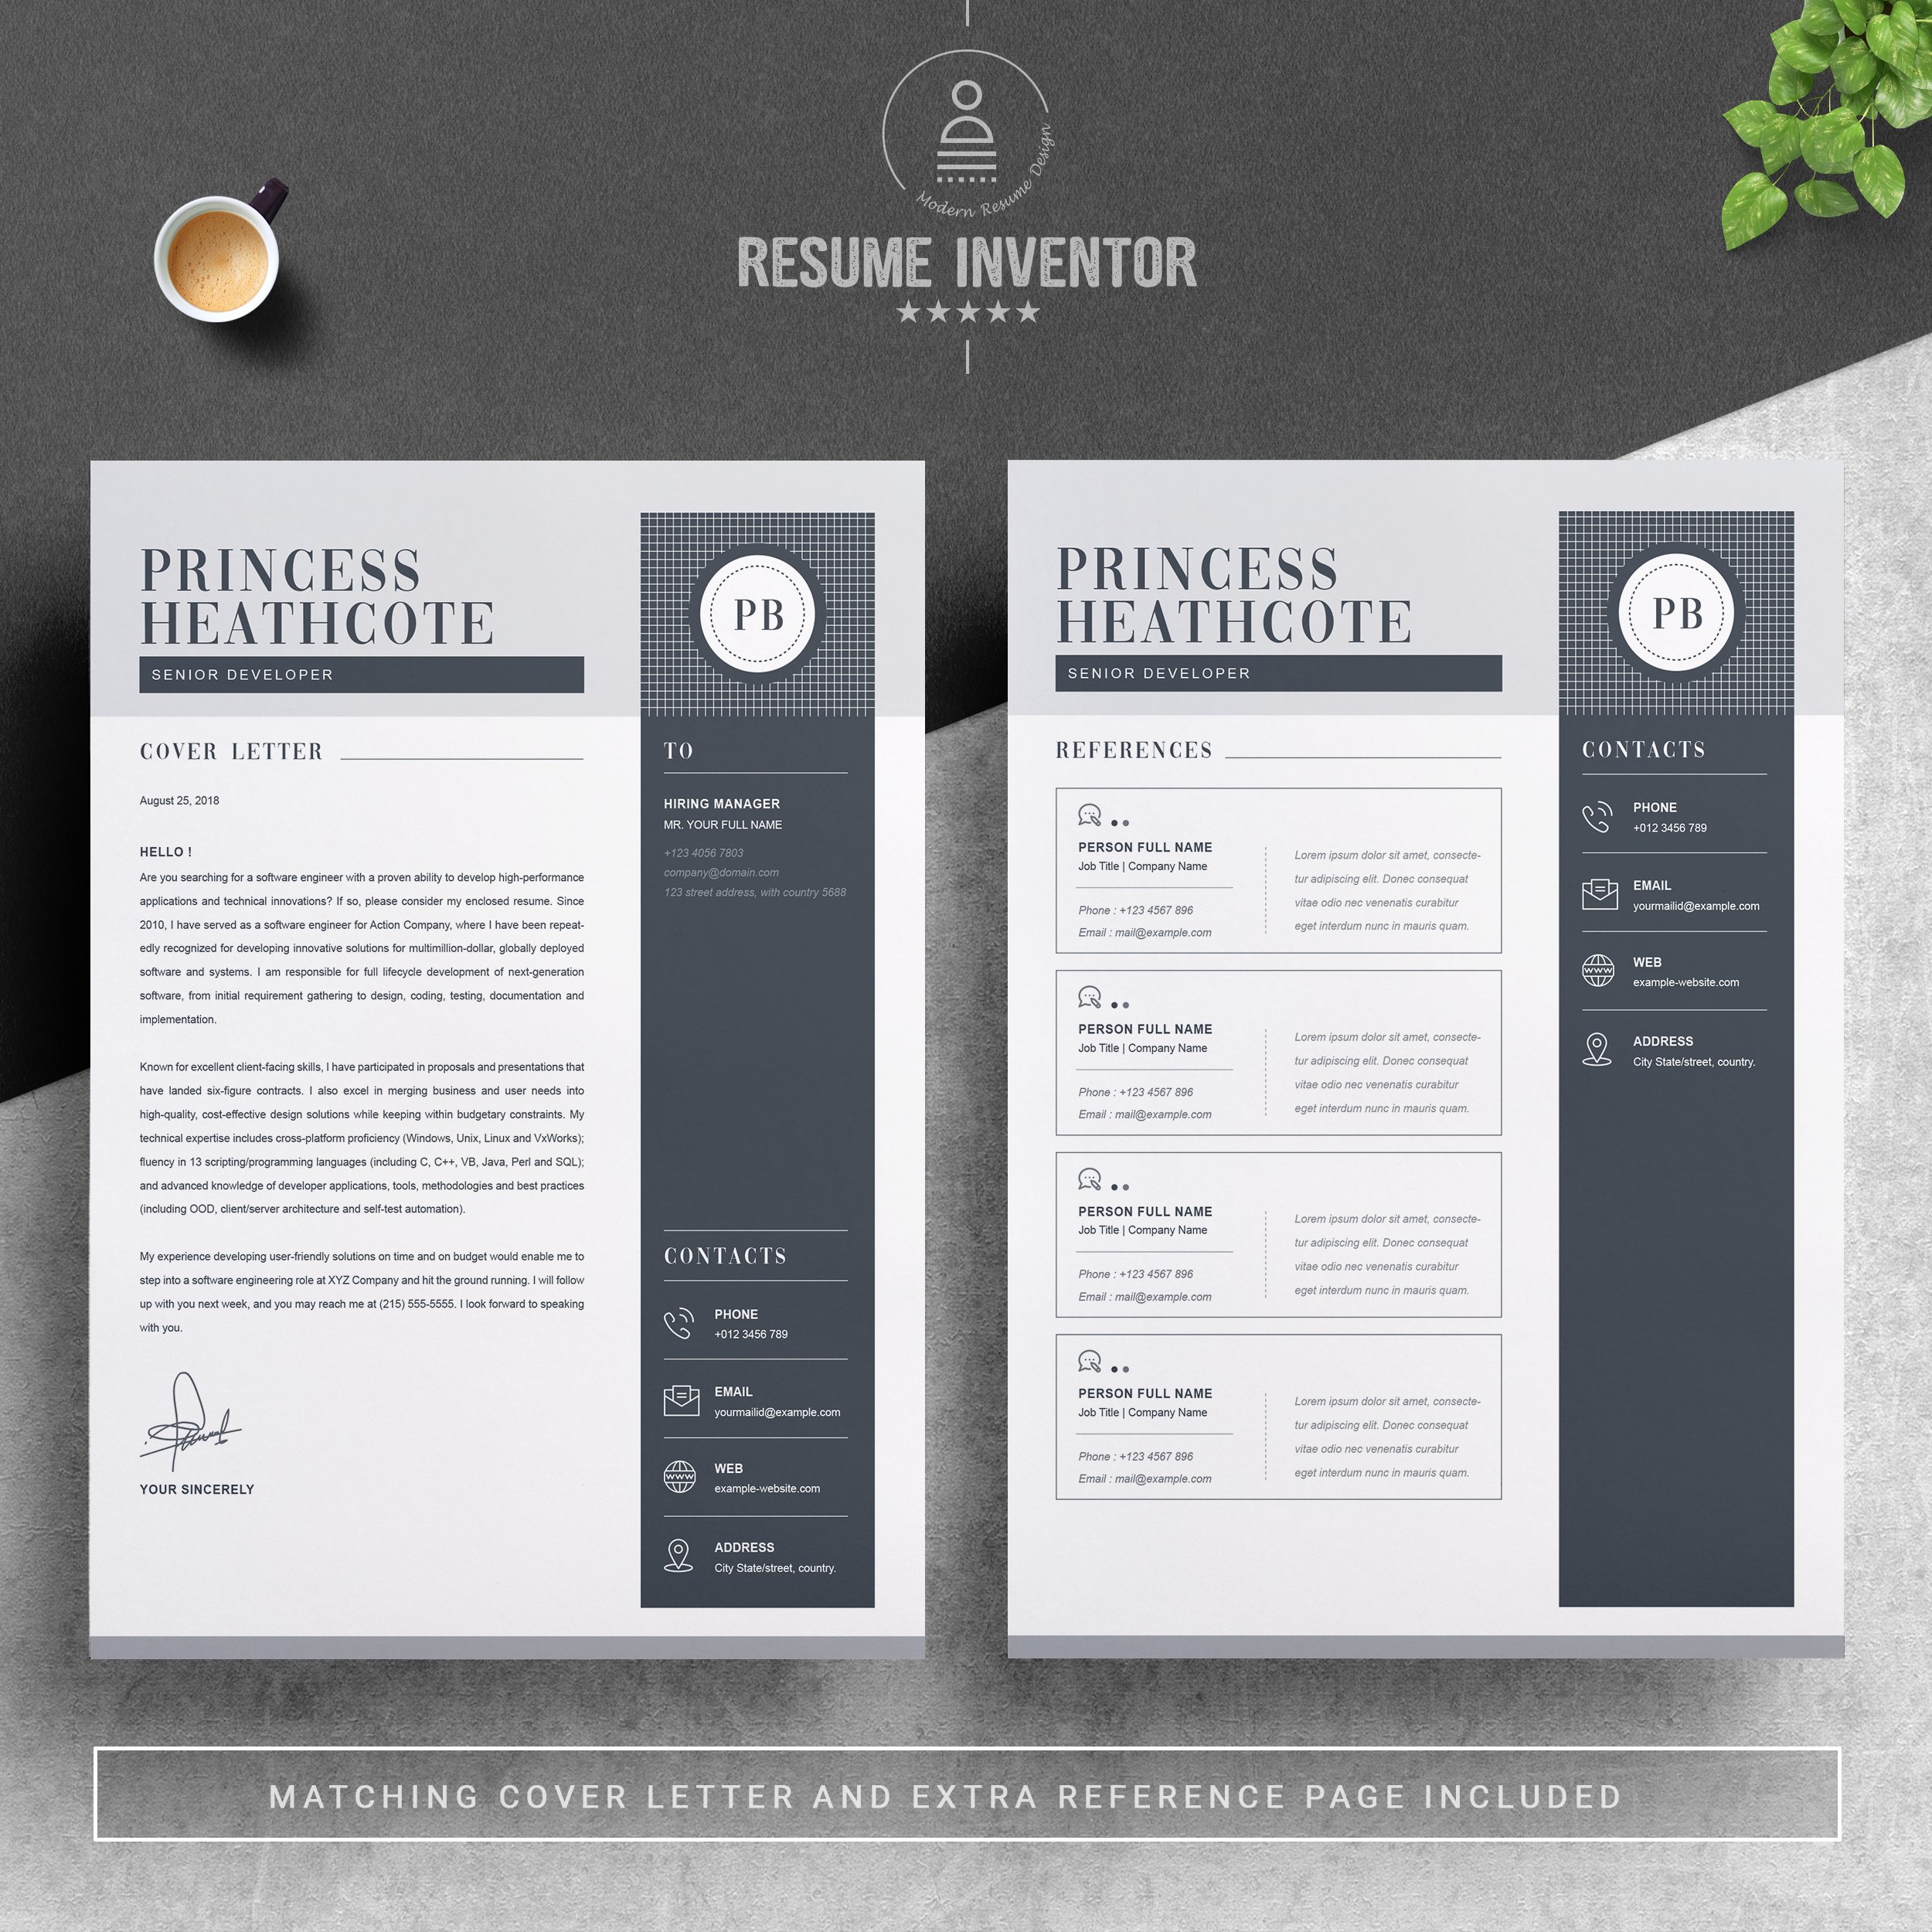 03 2 pages free resume design template 212